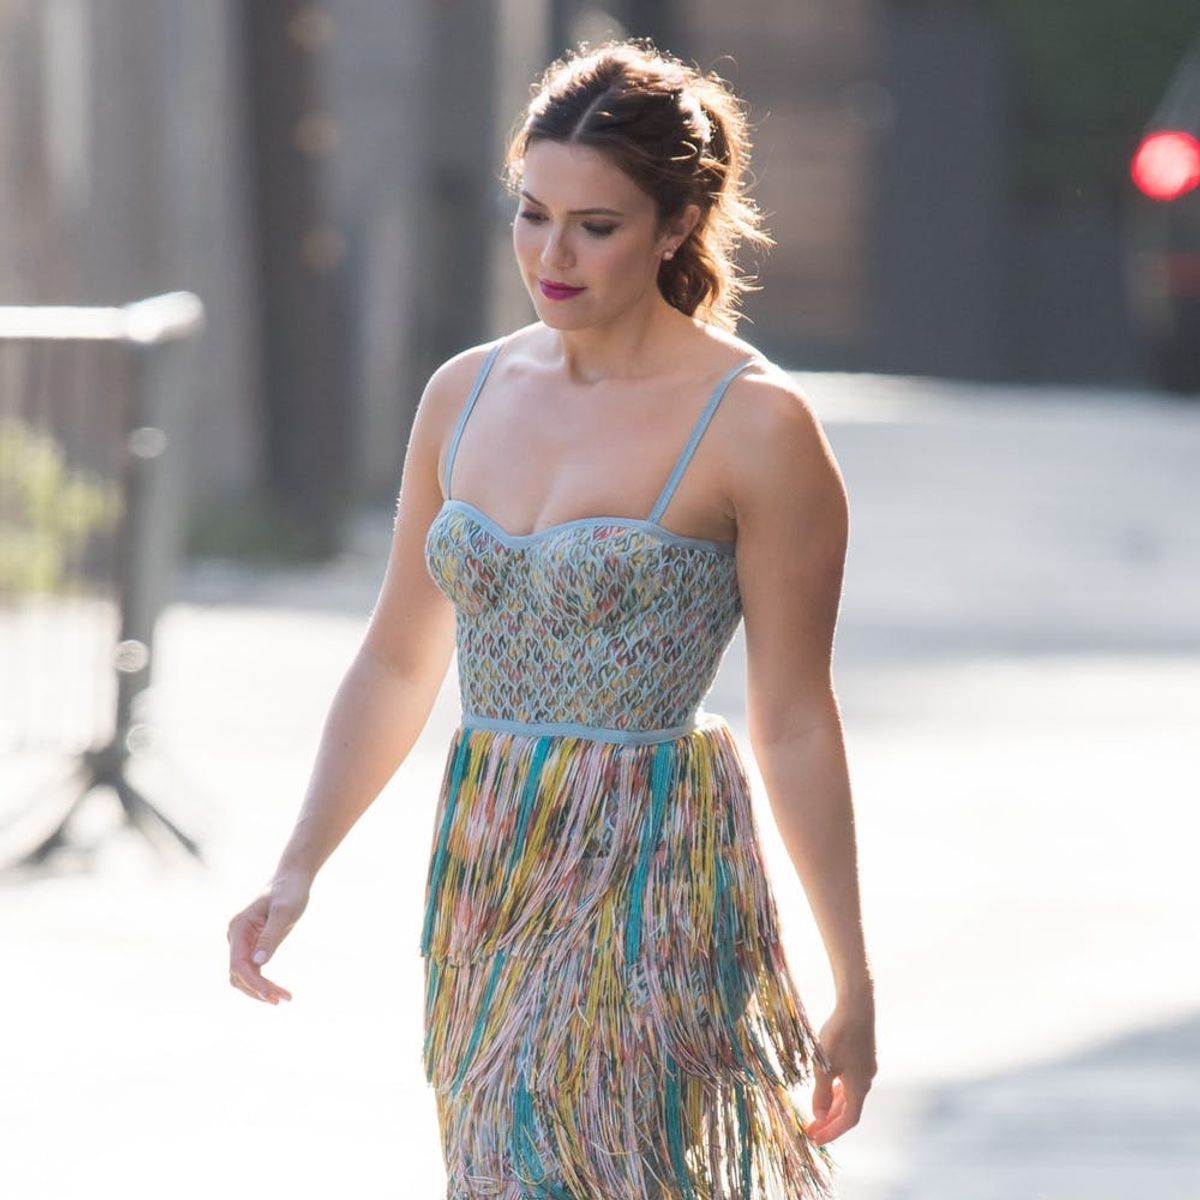 Mandy Moore Just Brought Back This Retro Dress Style, and We’re So Here for It